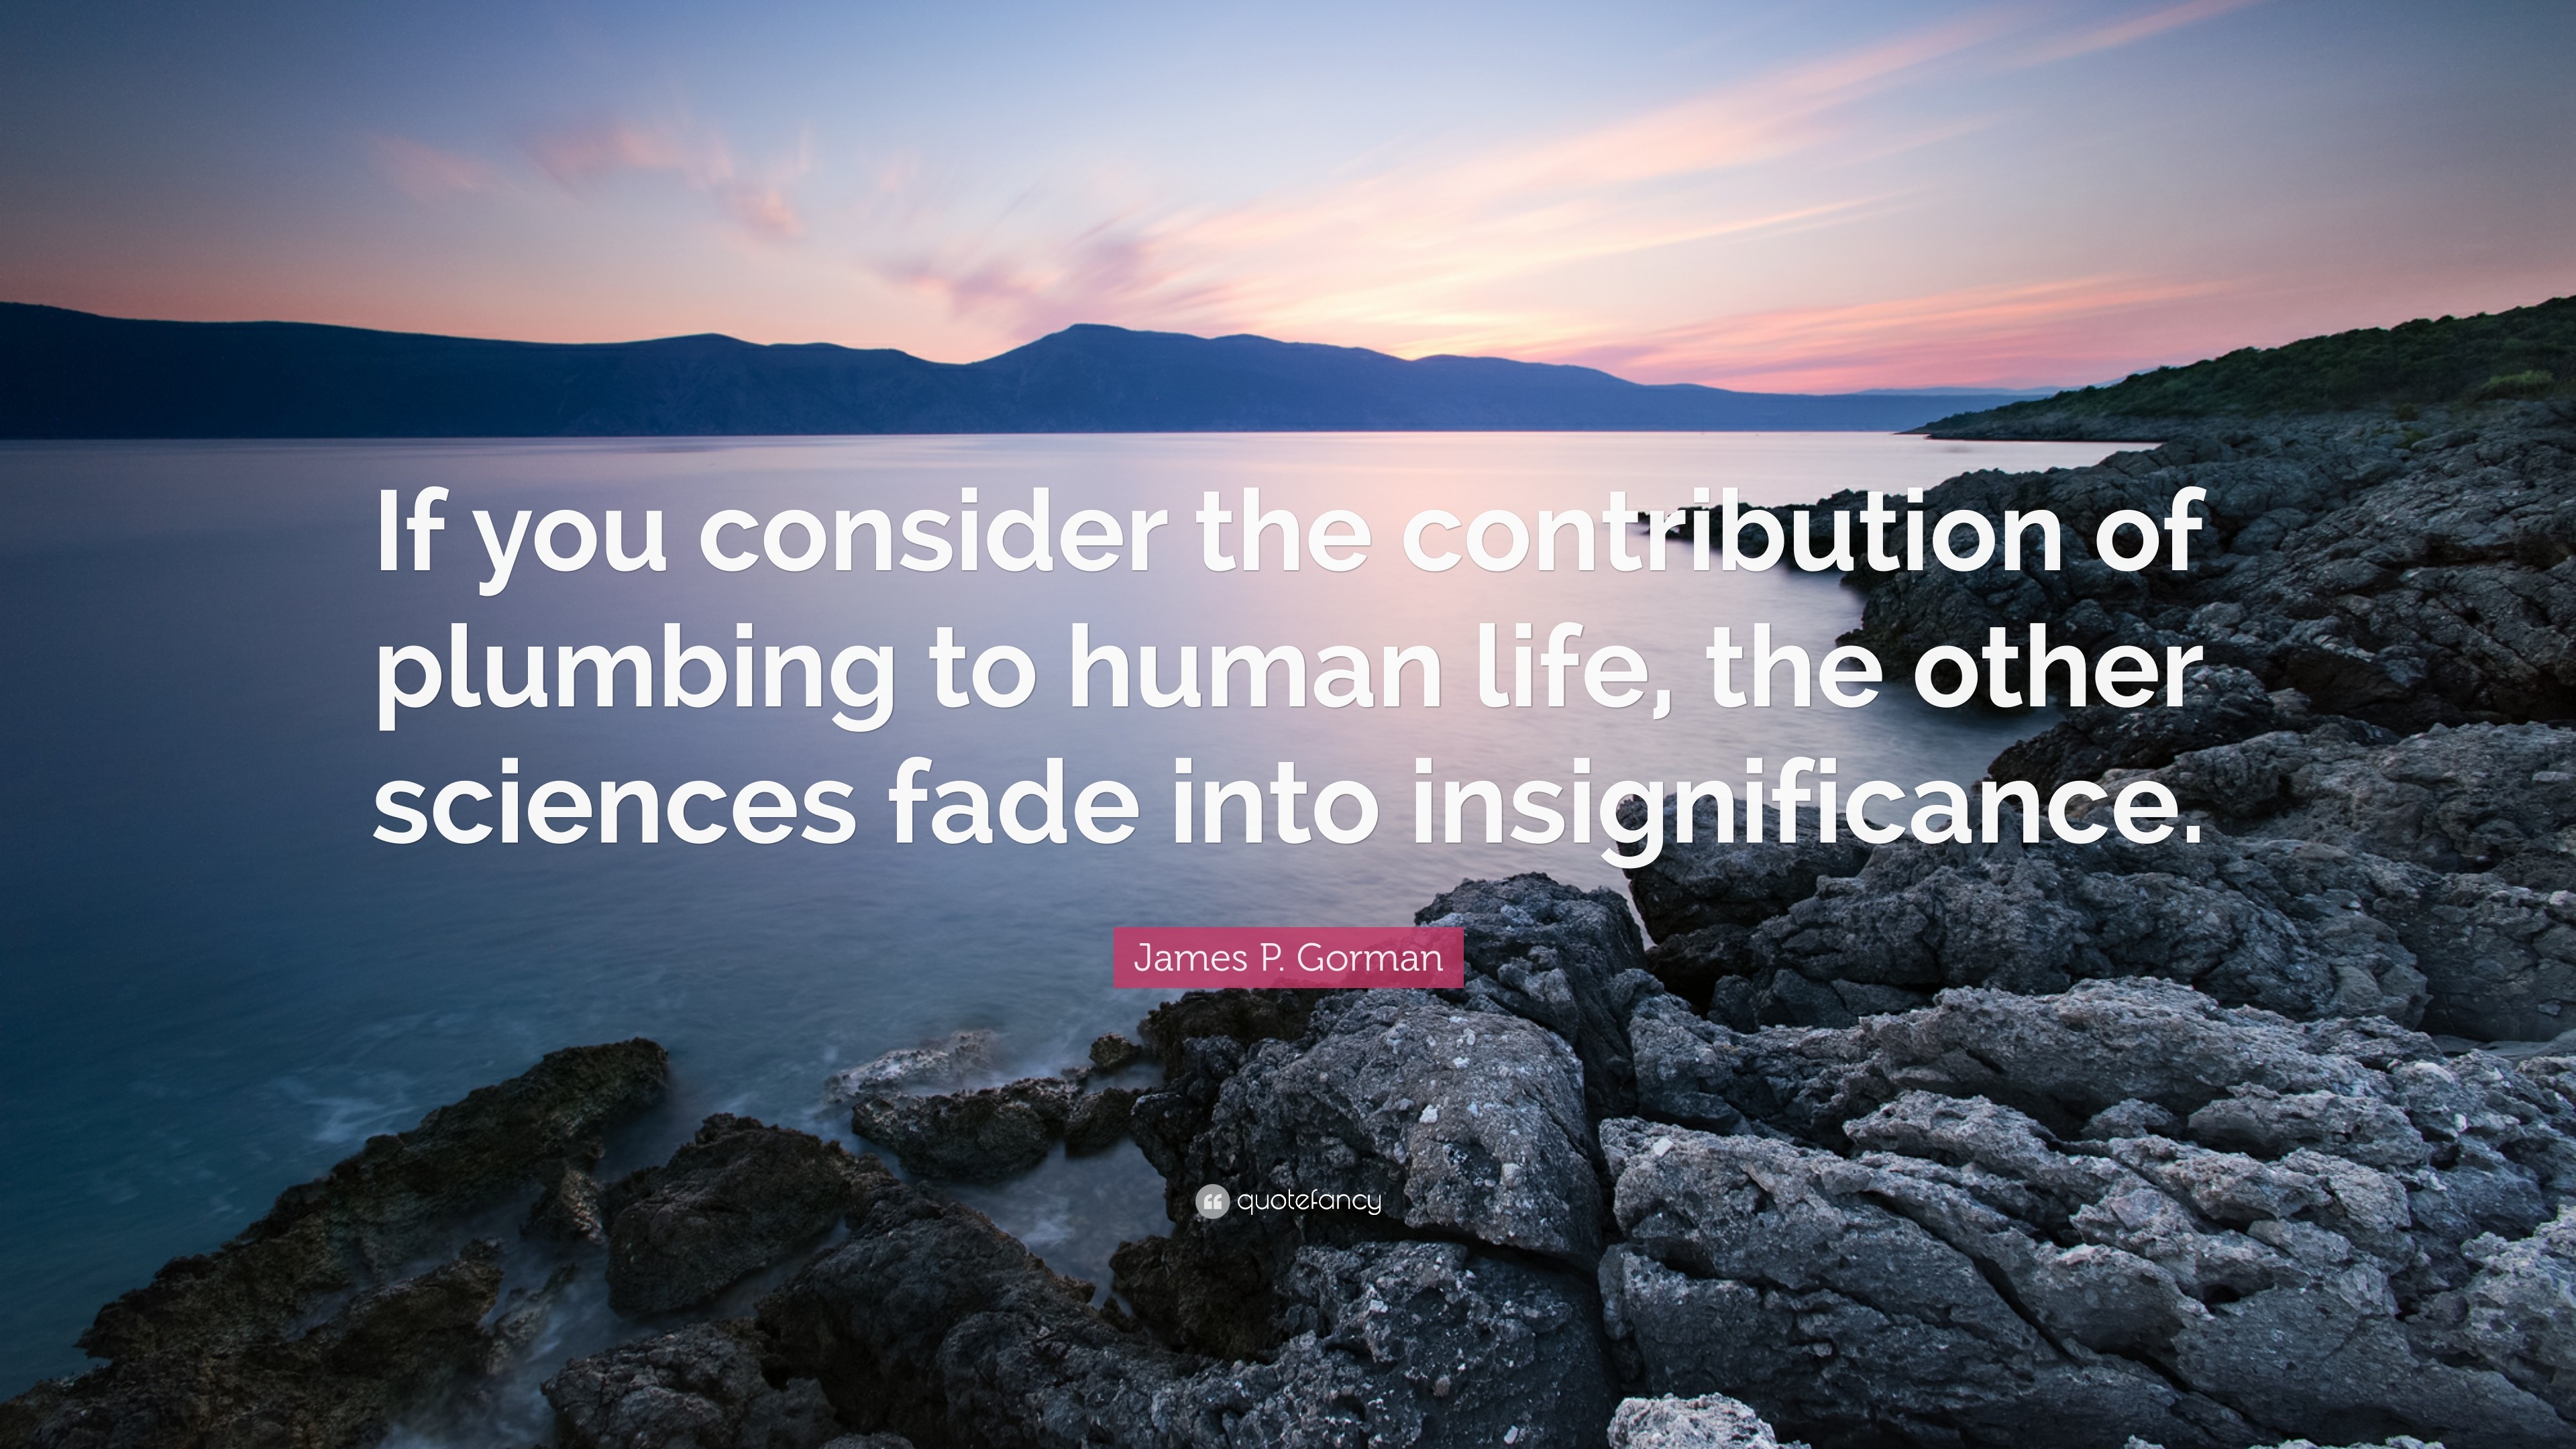 3840x2160 James P. Gorman Quote: “If you consider the contribution of plumbing to  human